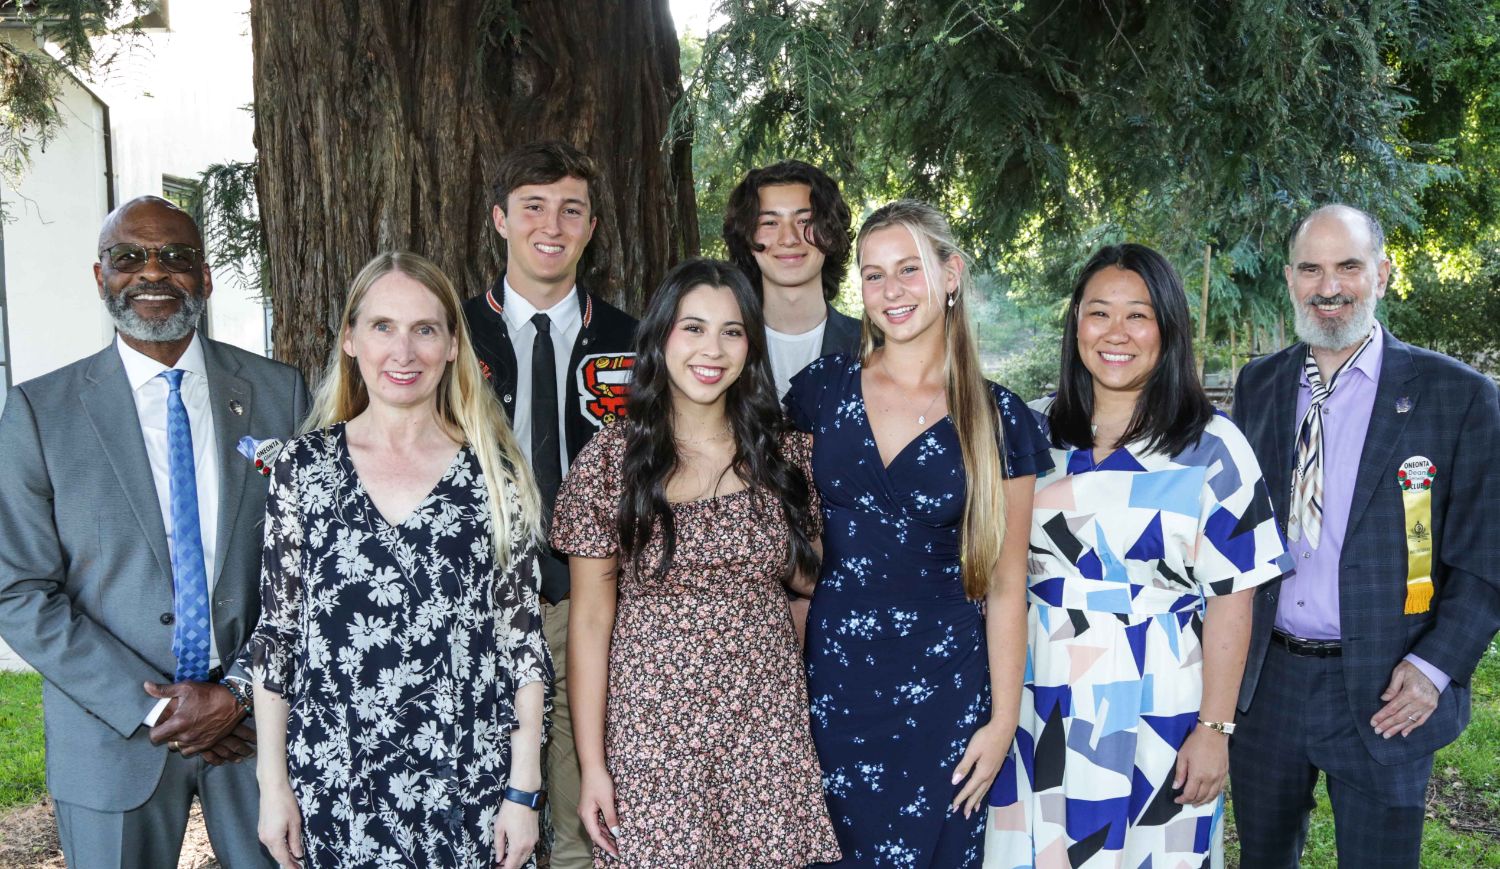 PHOTO: provided by The Oneonta Club | The South Pasadenan | Oneonta Club President Glenn Crawford with Teacher of the Year, Aimee Levie-Hultman, scholarship recipients Sawyer Fox, Mia Ramos, Truman Lindenthaler, Danica Sterling, Teacher of the Year recipient, Judy Ho, and Oneonta Foundation President, Dean Serwin. 